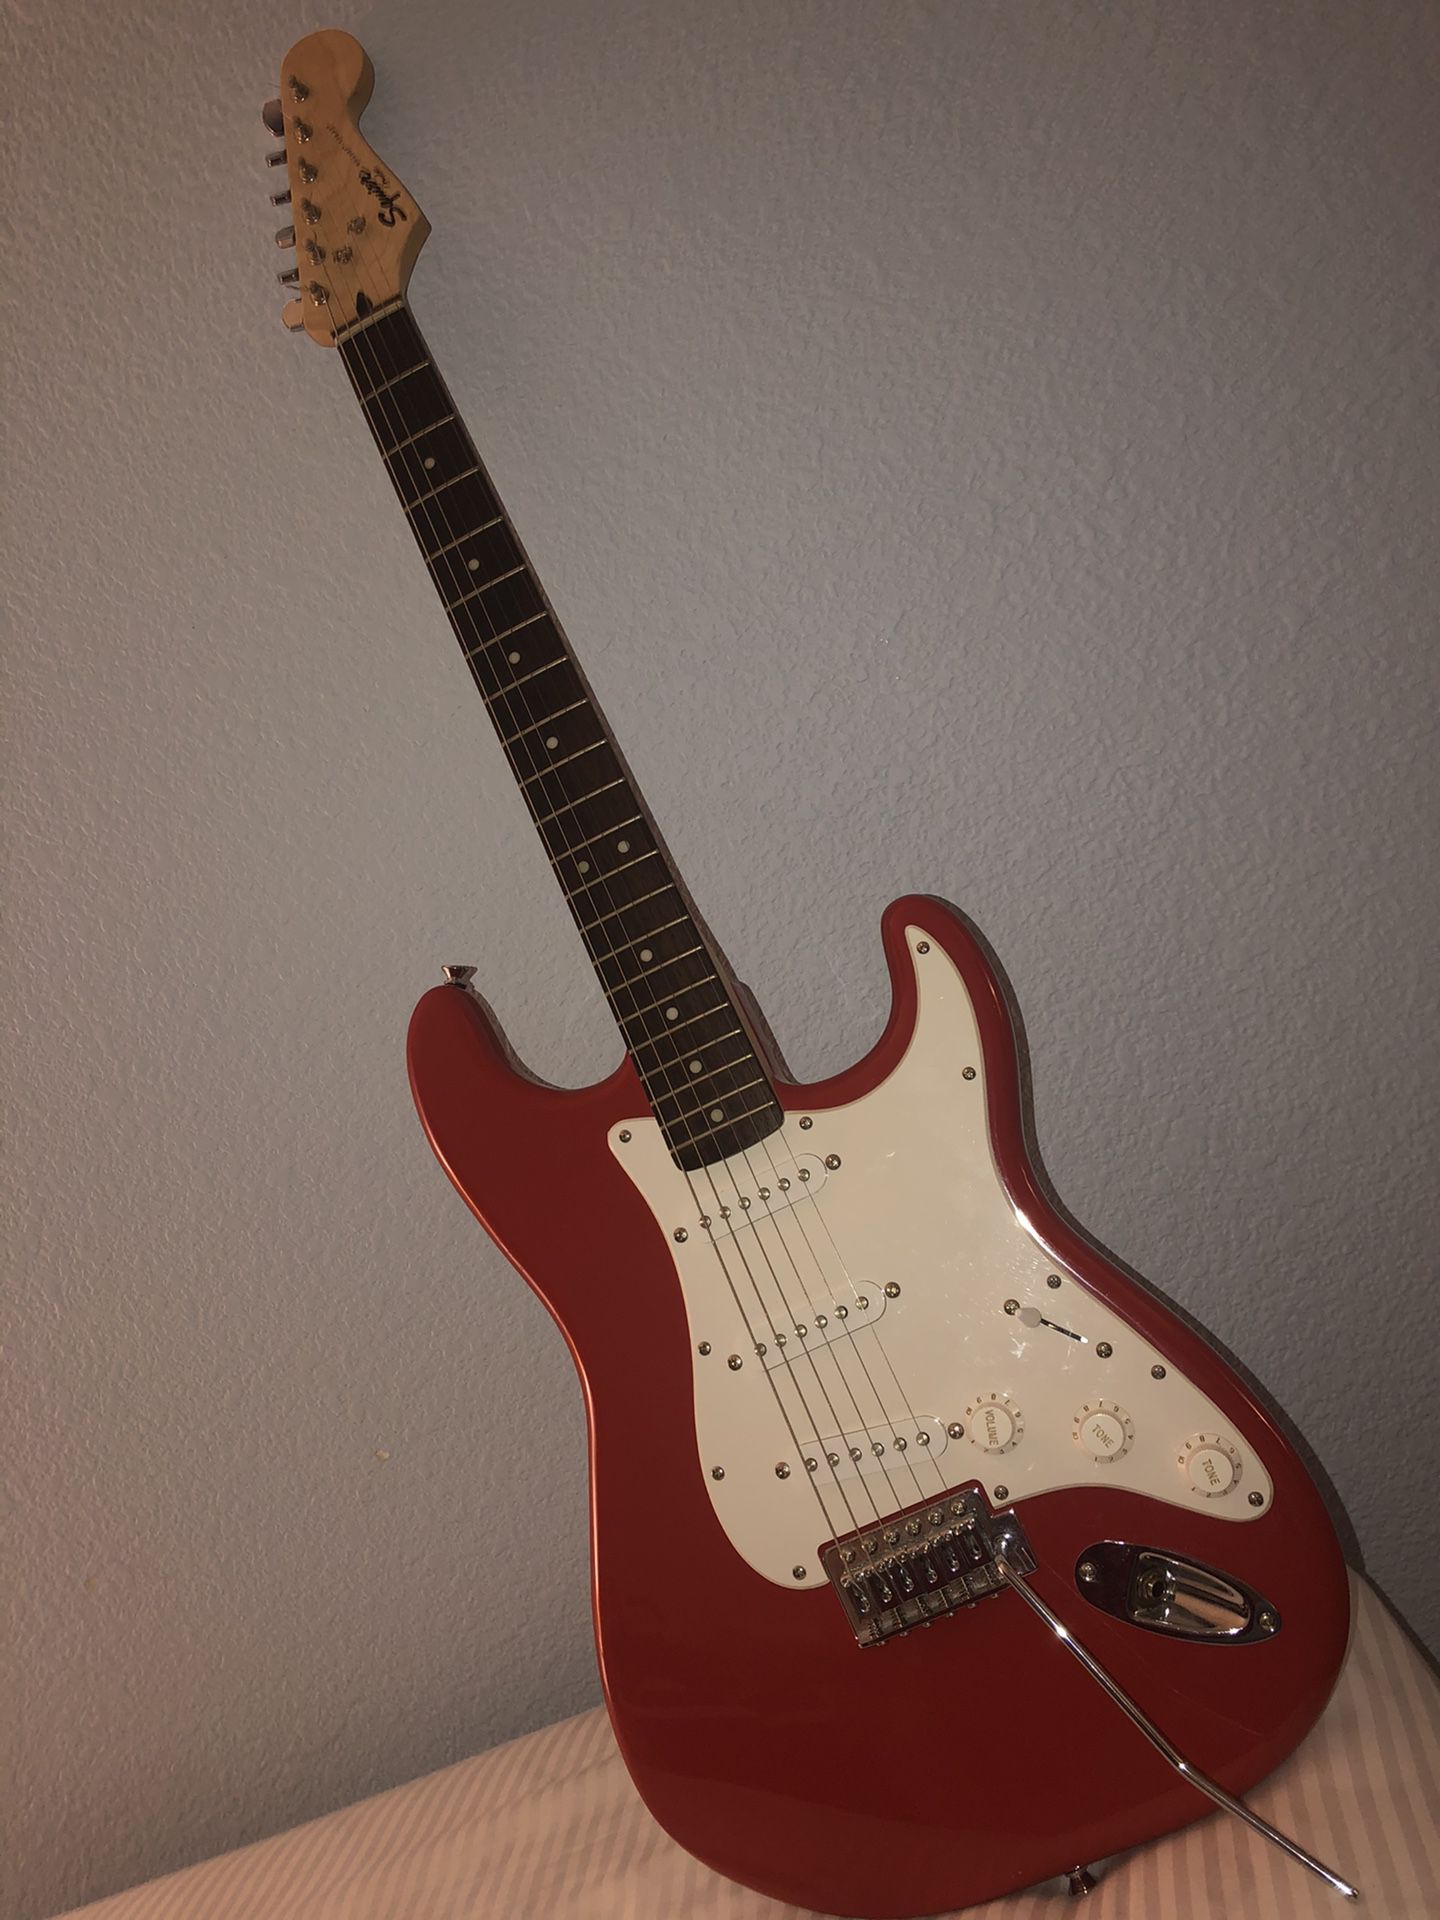 Squire Bullet Strat by Fender